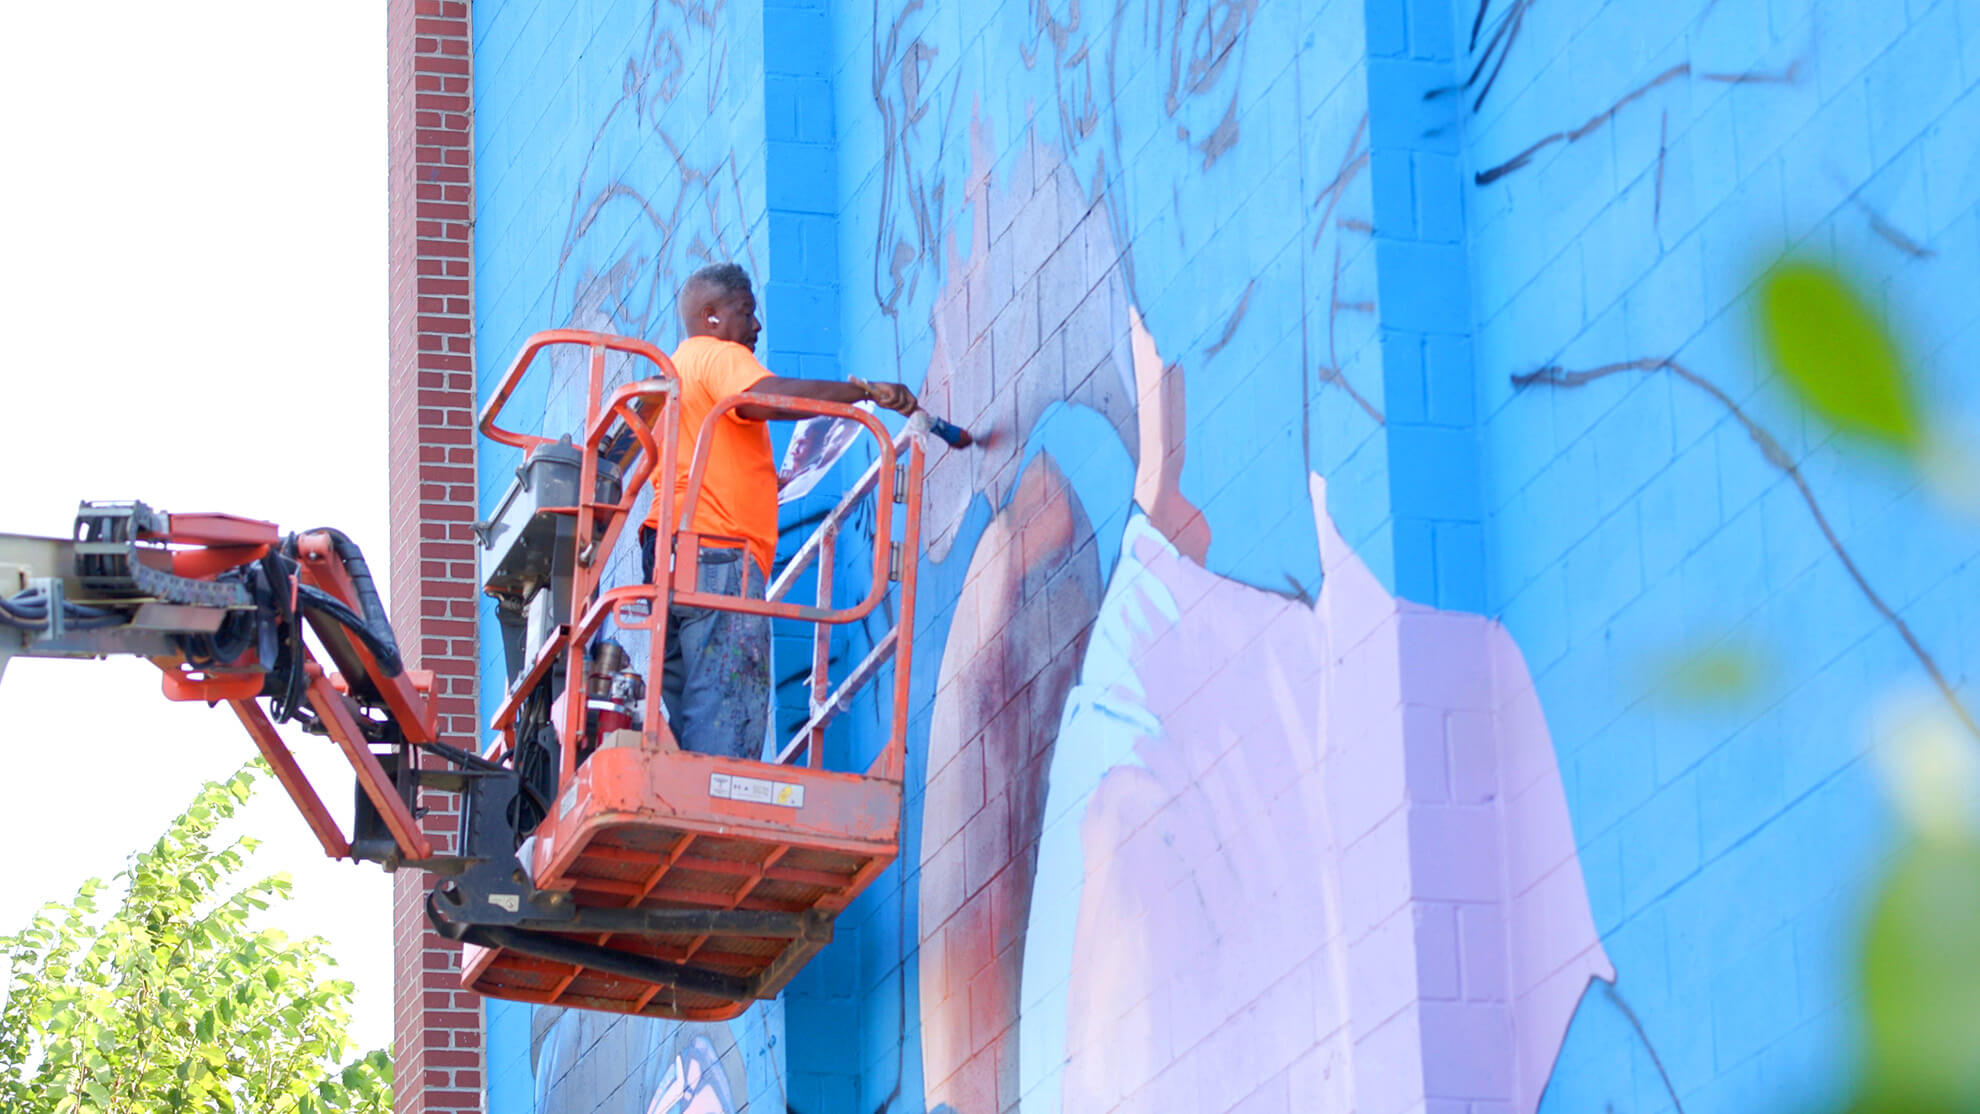 The artist Ernest Shaw, wearing an orange shirt and jeans mending the mural while on a mobile elevated working platform.